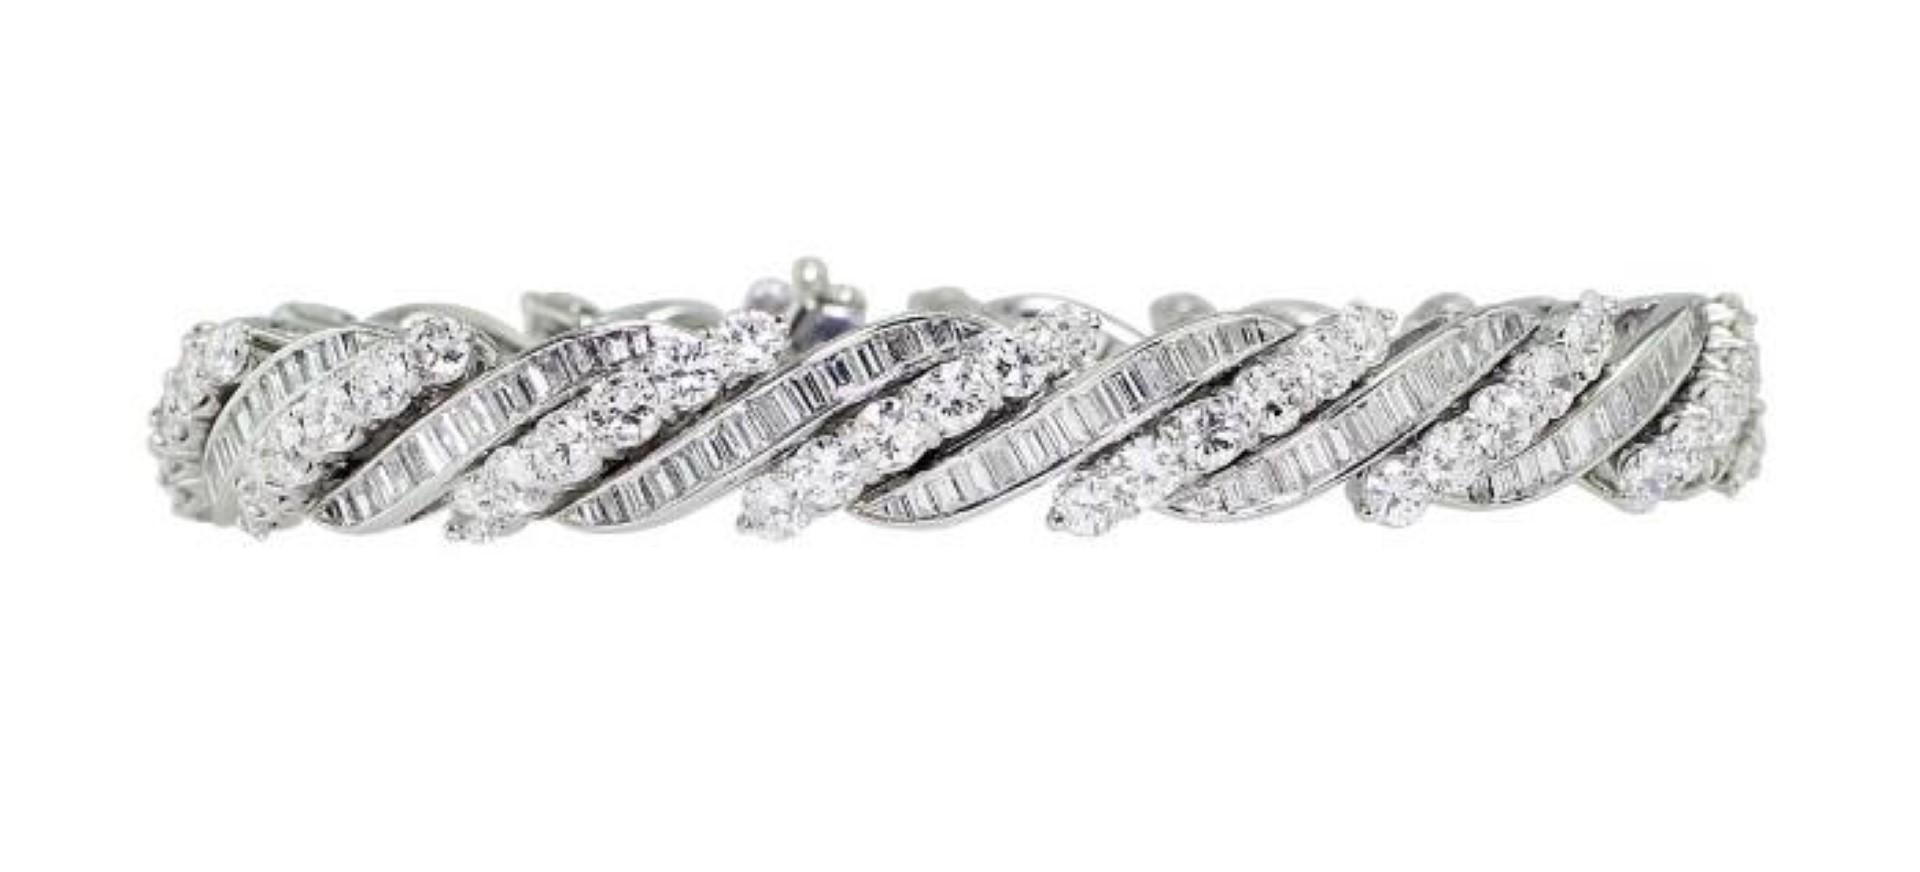 Gorgeous Swiss-made platinum bracelet set with 196 baguette cut diamonds and 84 round cut diamonds weighing a total of approximately 14.96cttw. Perfect craftmanship visible in the seamless clasp.